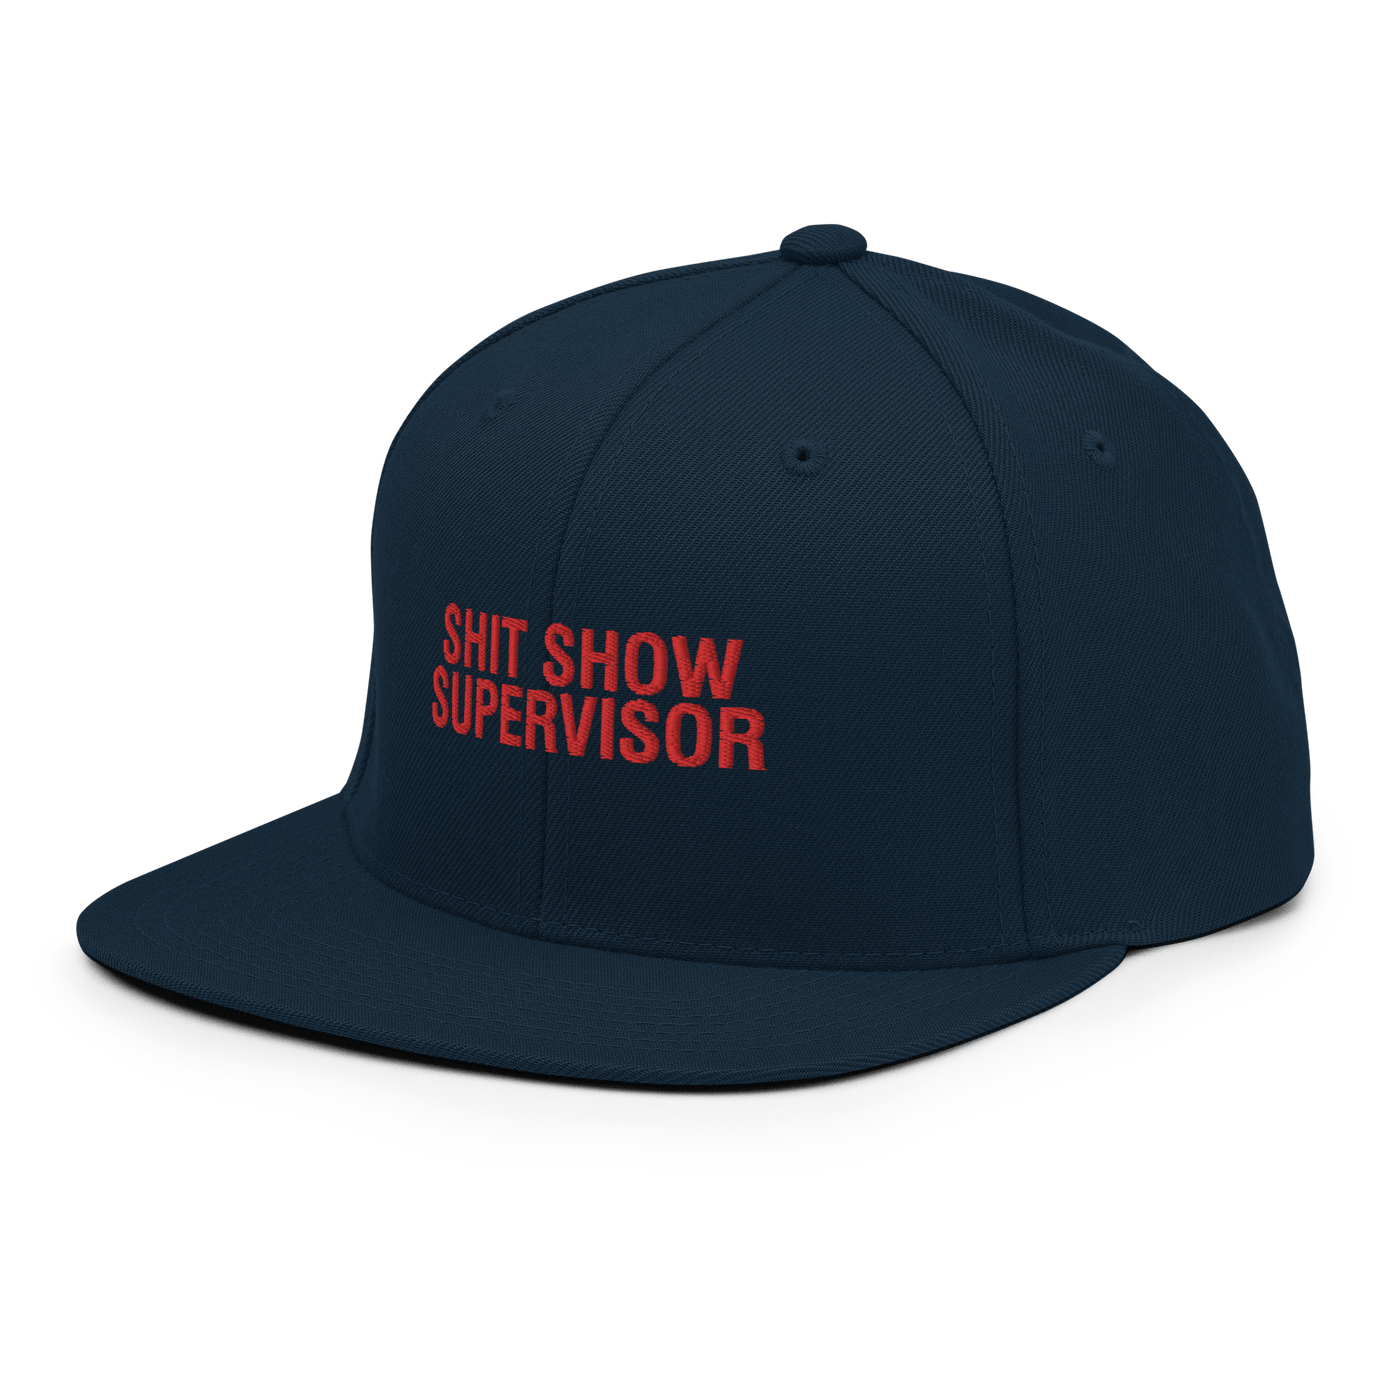 Shit Show Supervisor Snapback - Dark Navy - Just Another Cap Store